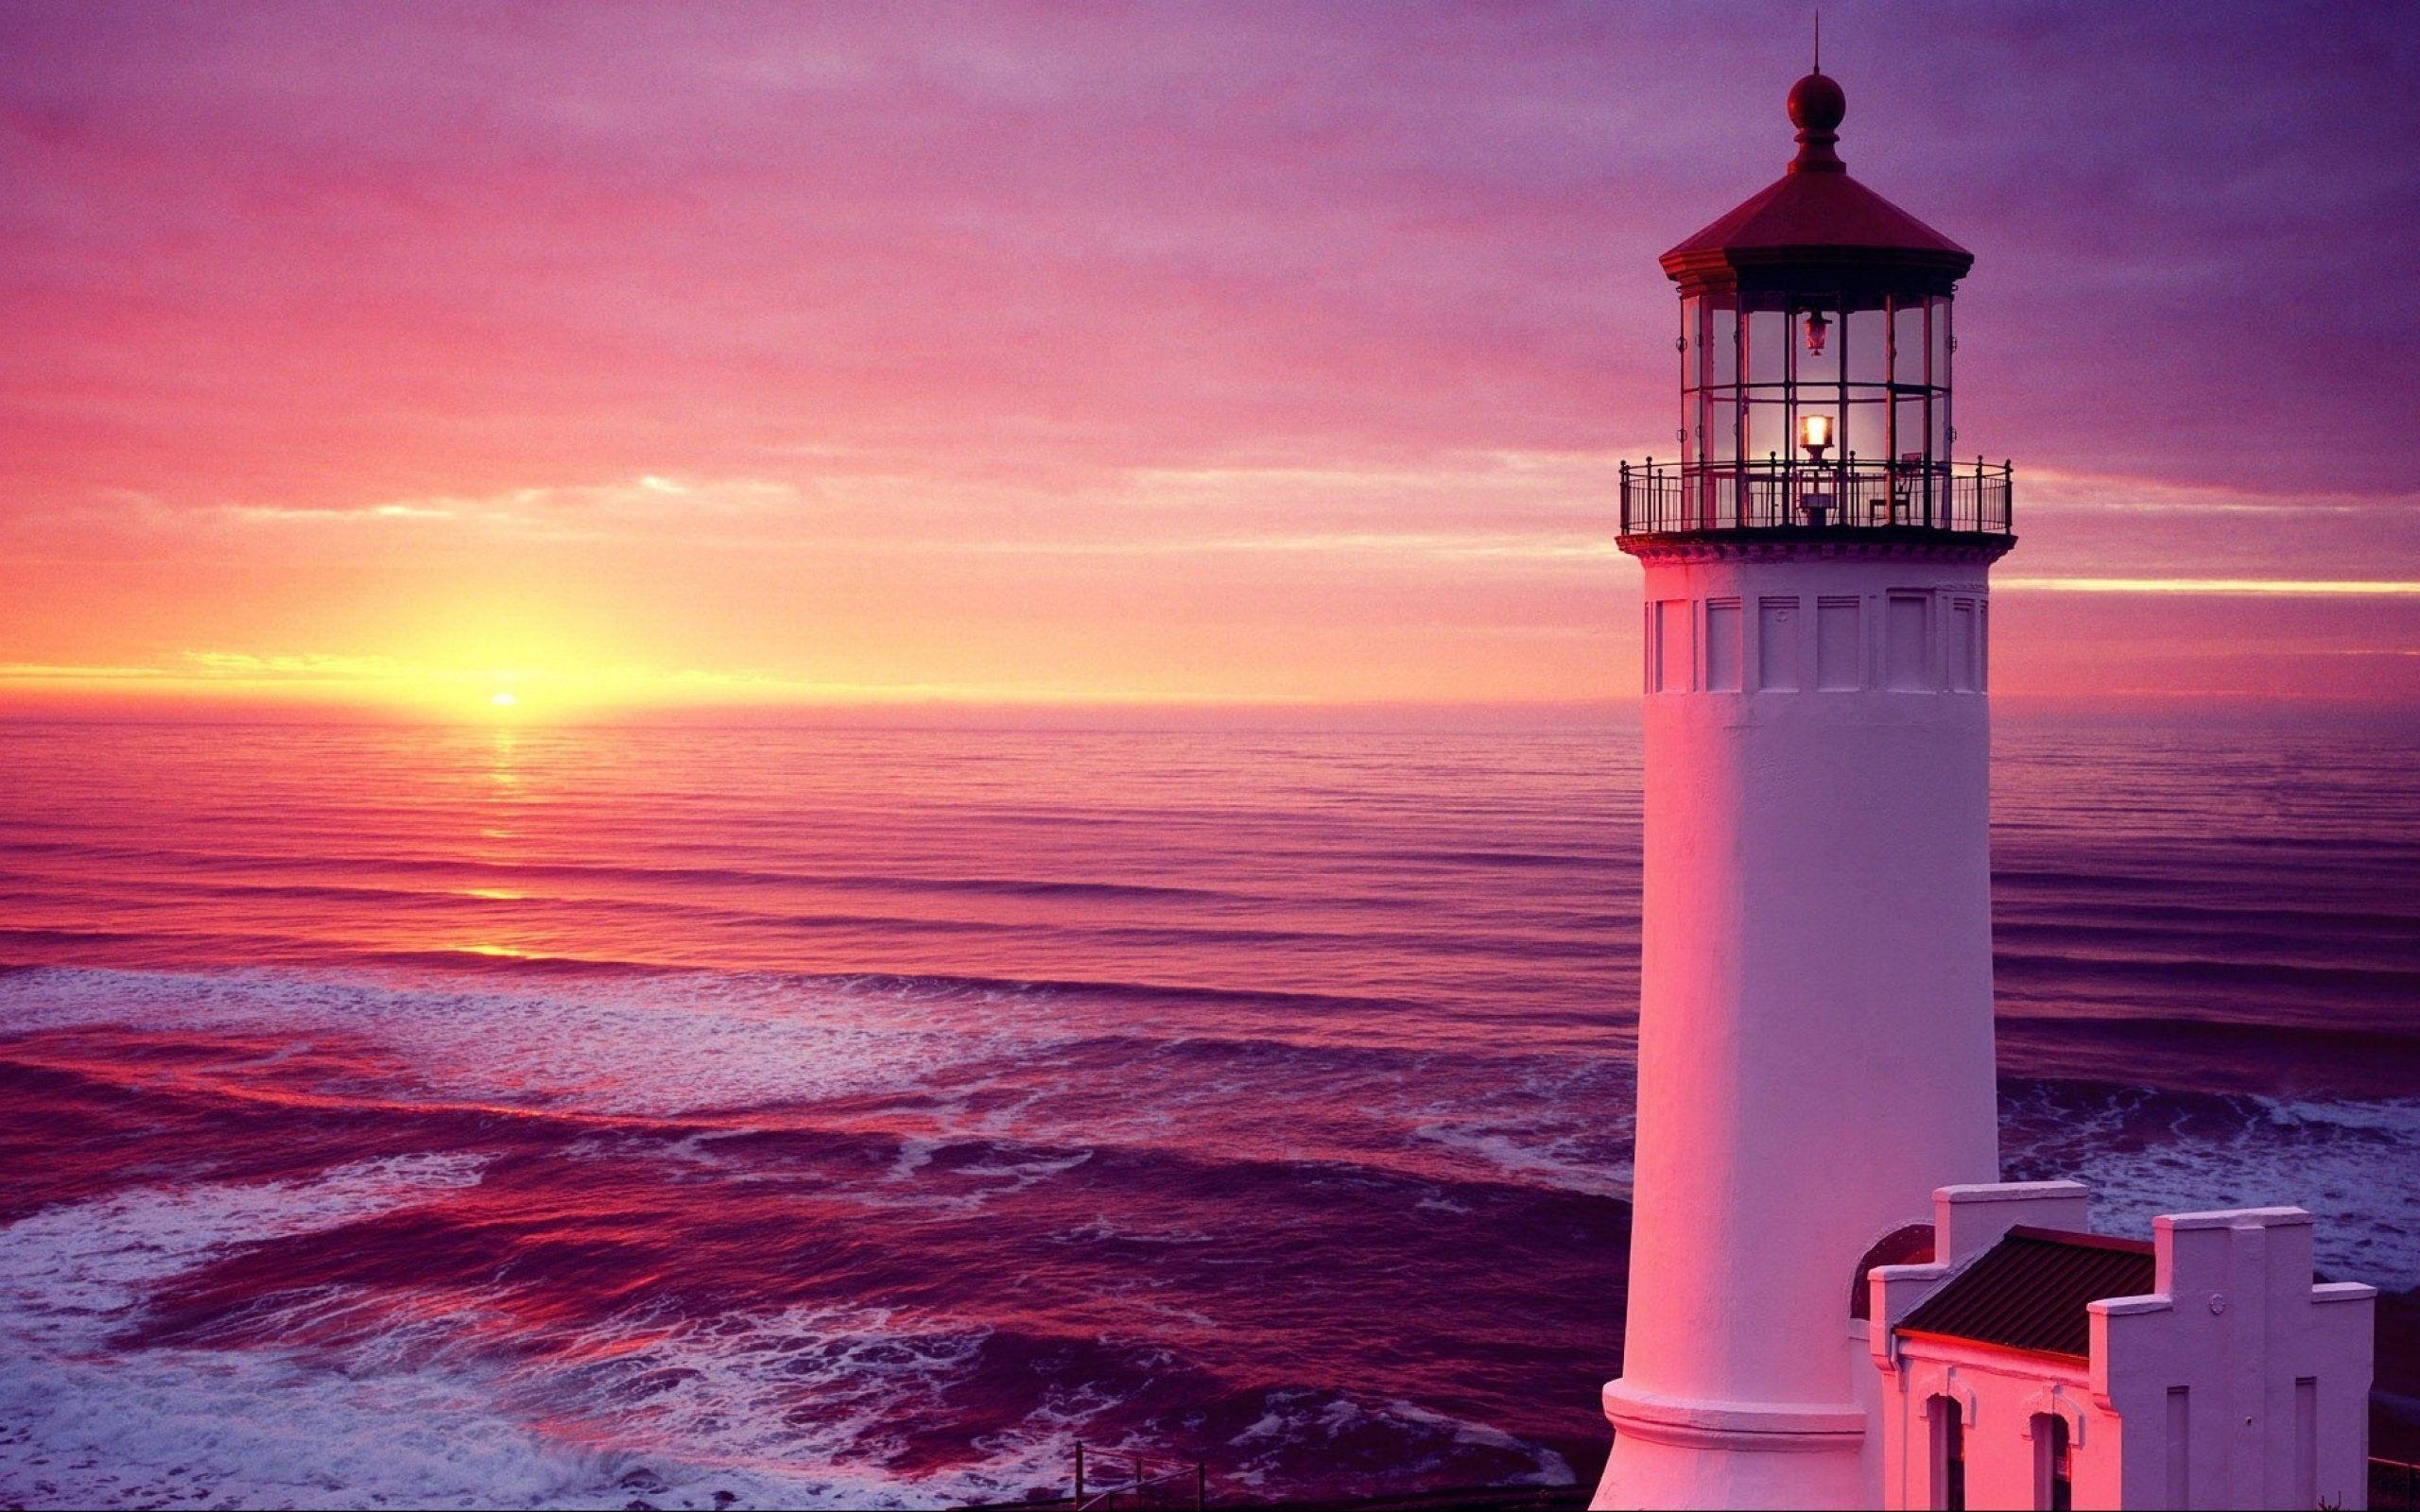 Sunset Lighthouse. Lighthouse Picture, Lighthouse